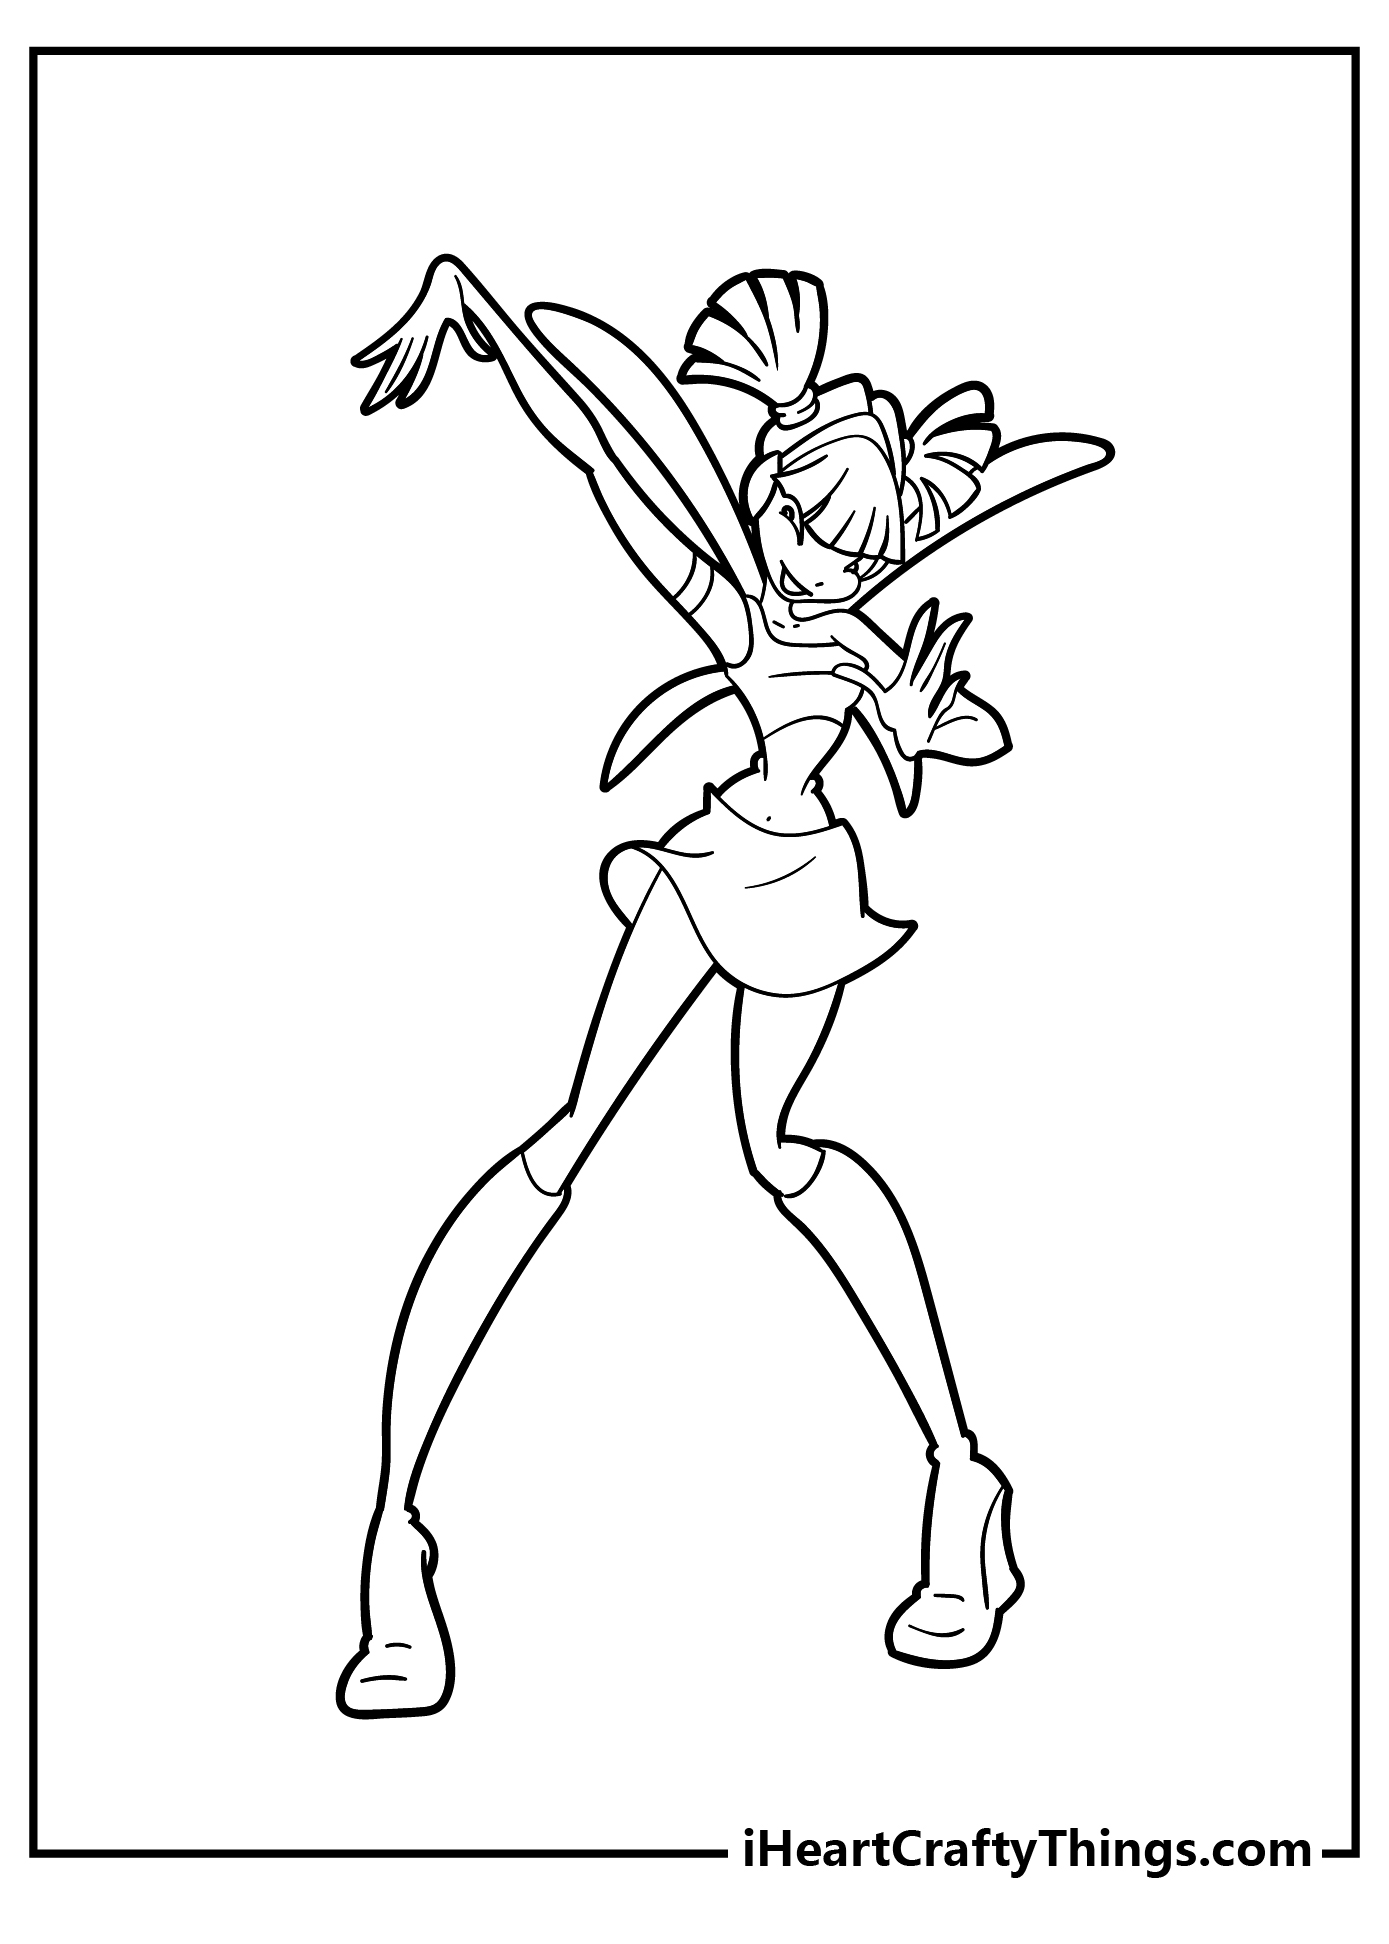 Winx Coloring Book for adults free download